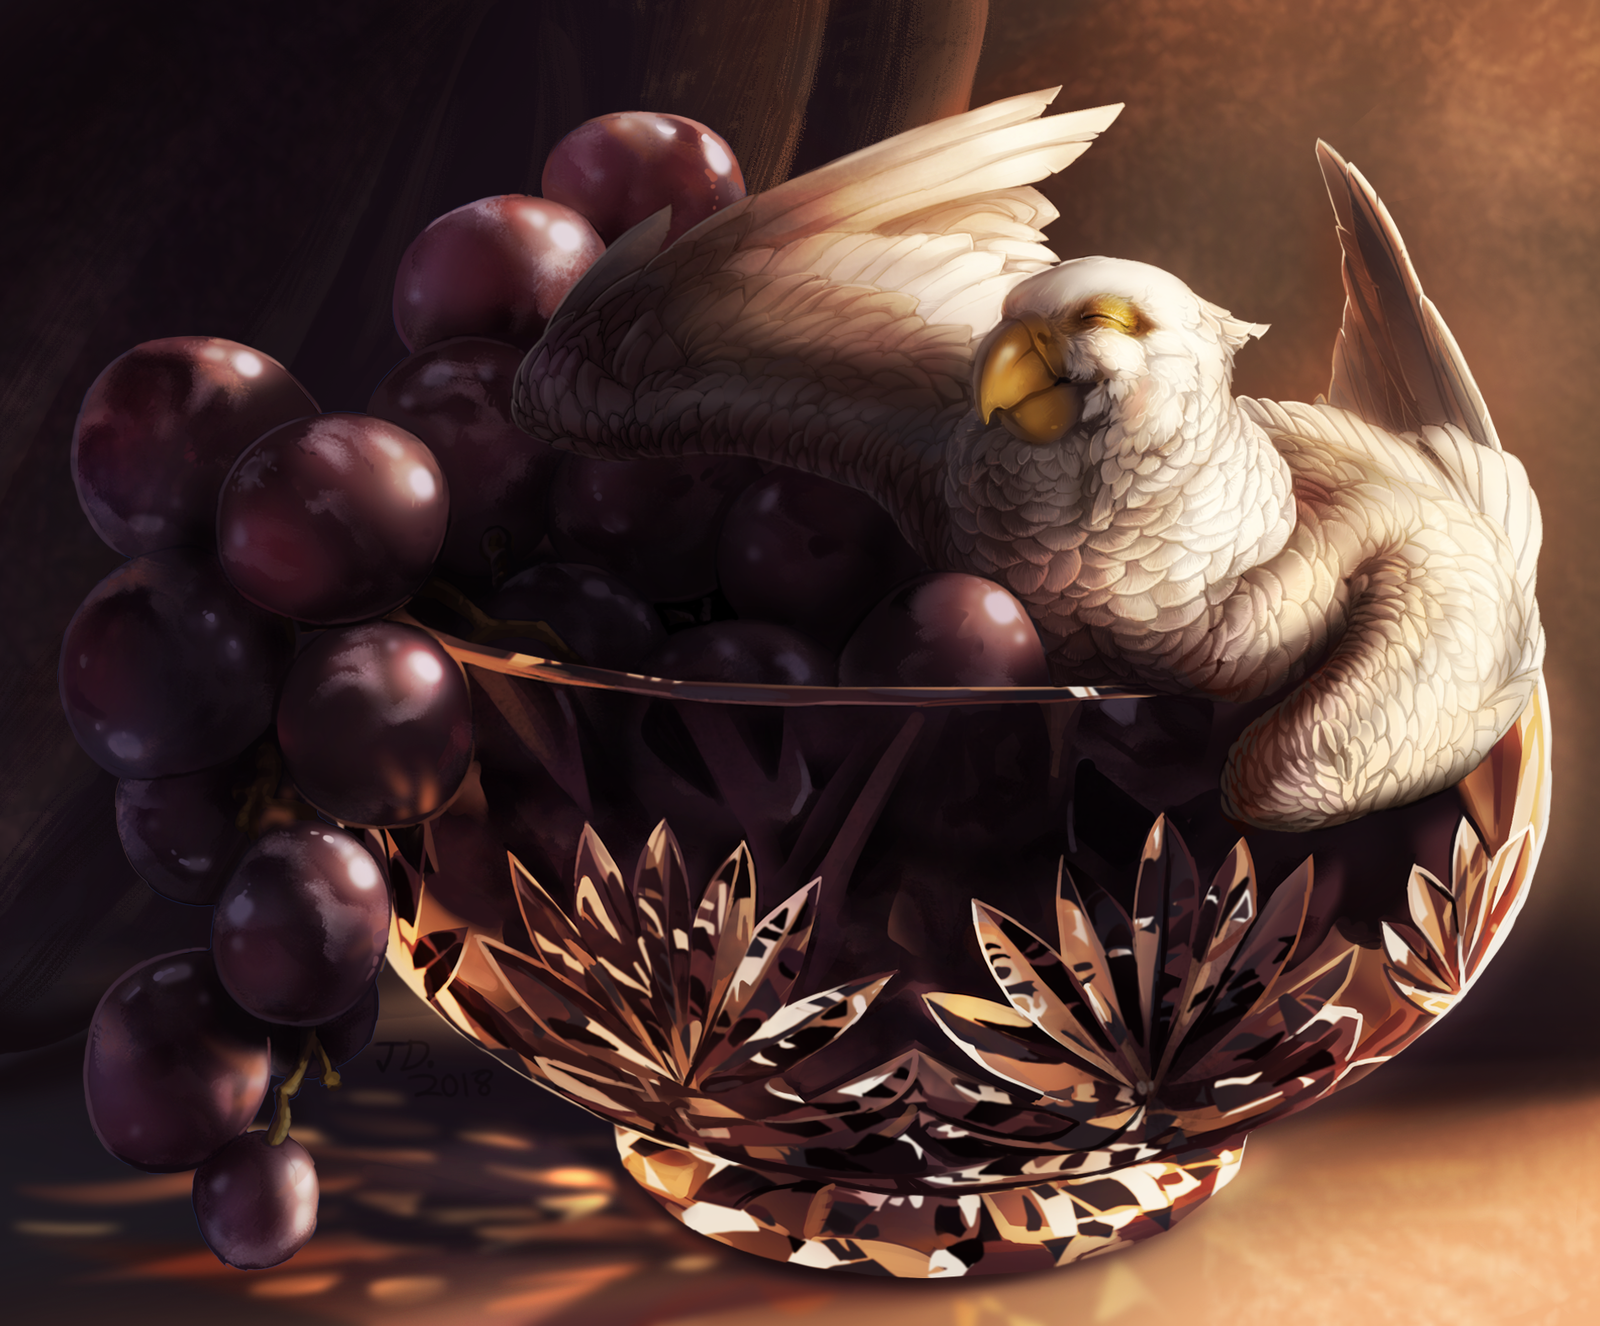 Gryphon and grapes - Griffin, Grape, Vase, Art